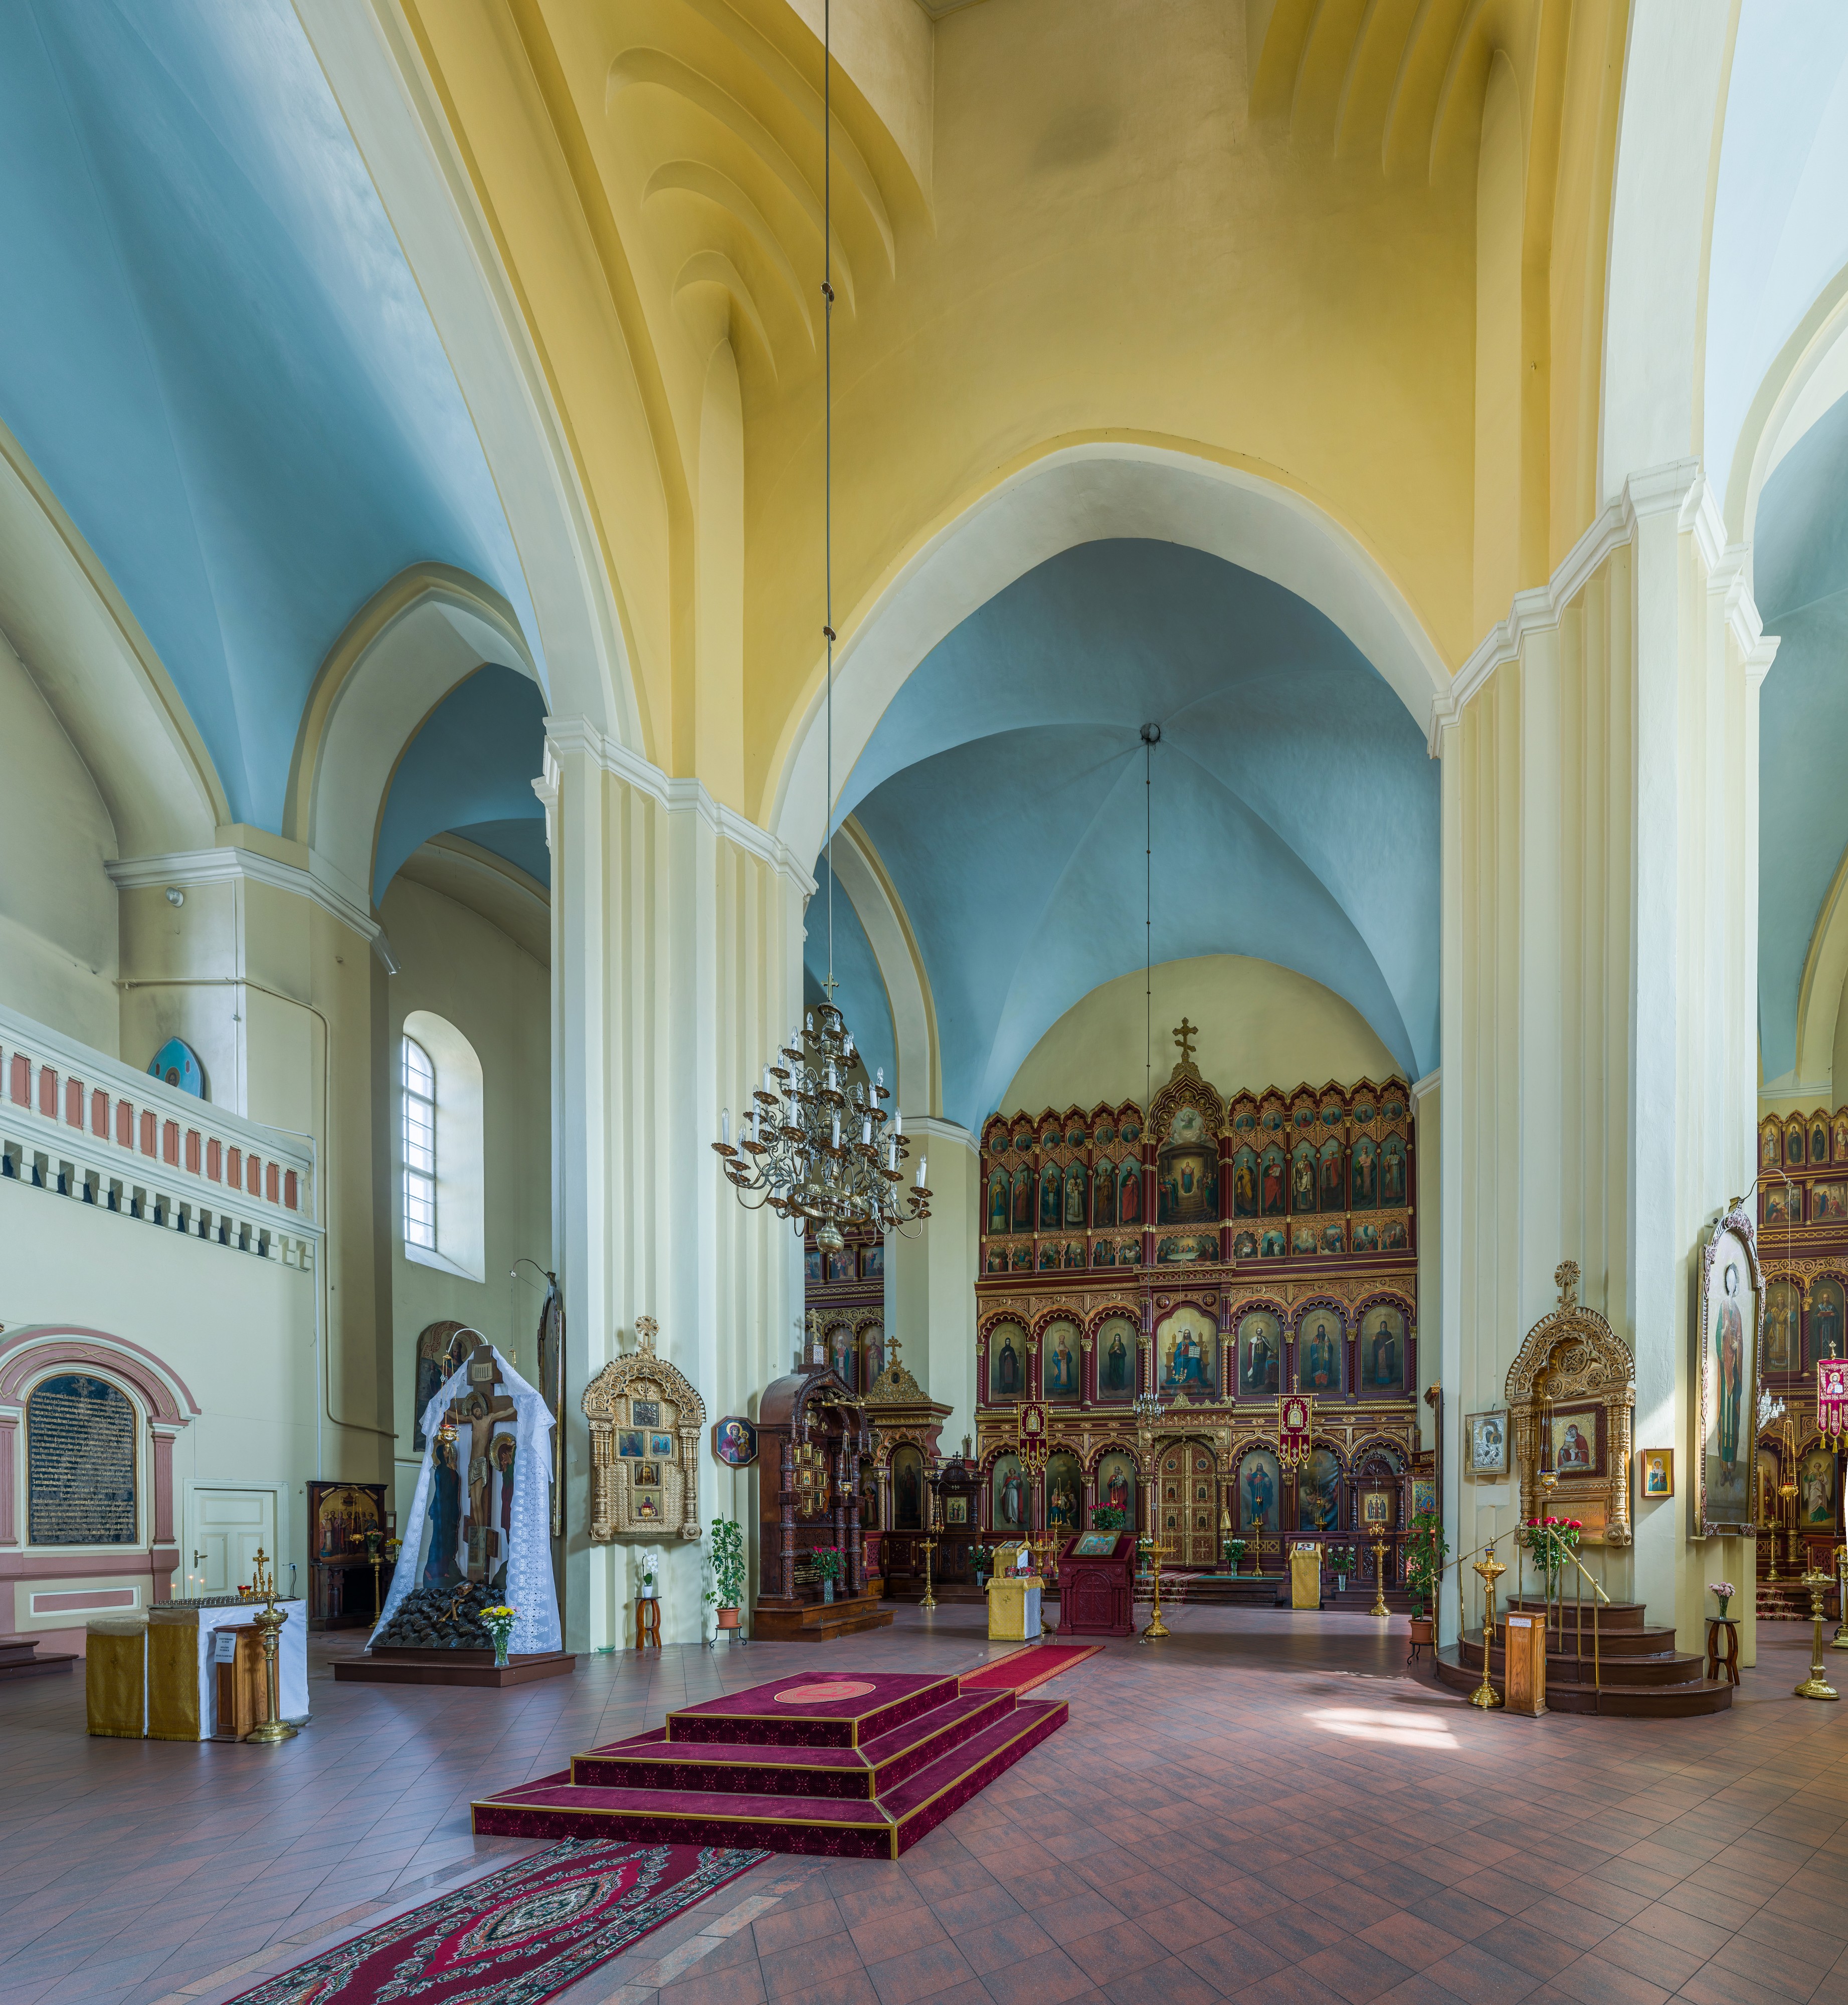 Orthodox Cathedral of the Dormition of the Theotokos 1, Vilnius, Lithuania - Diliff